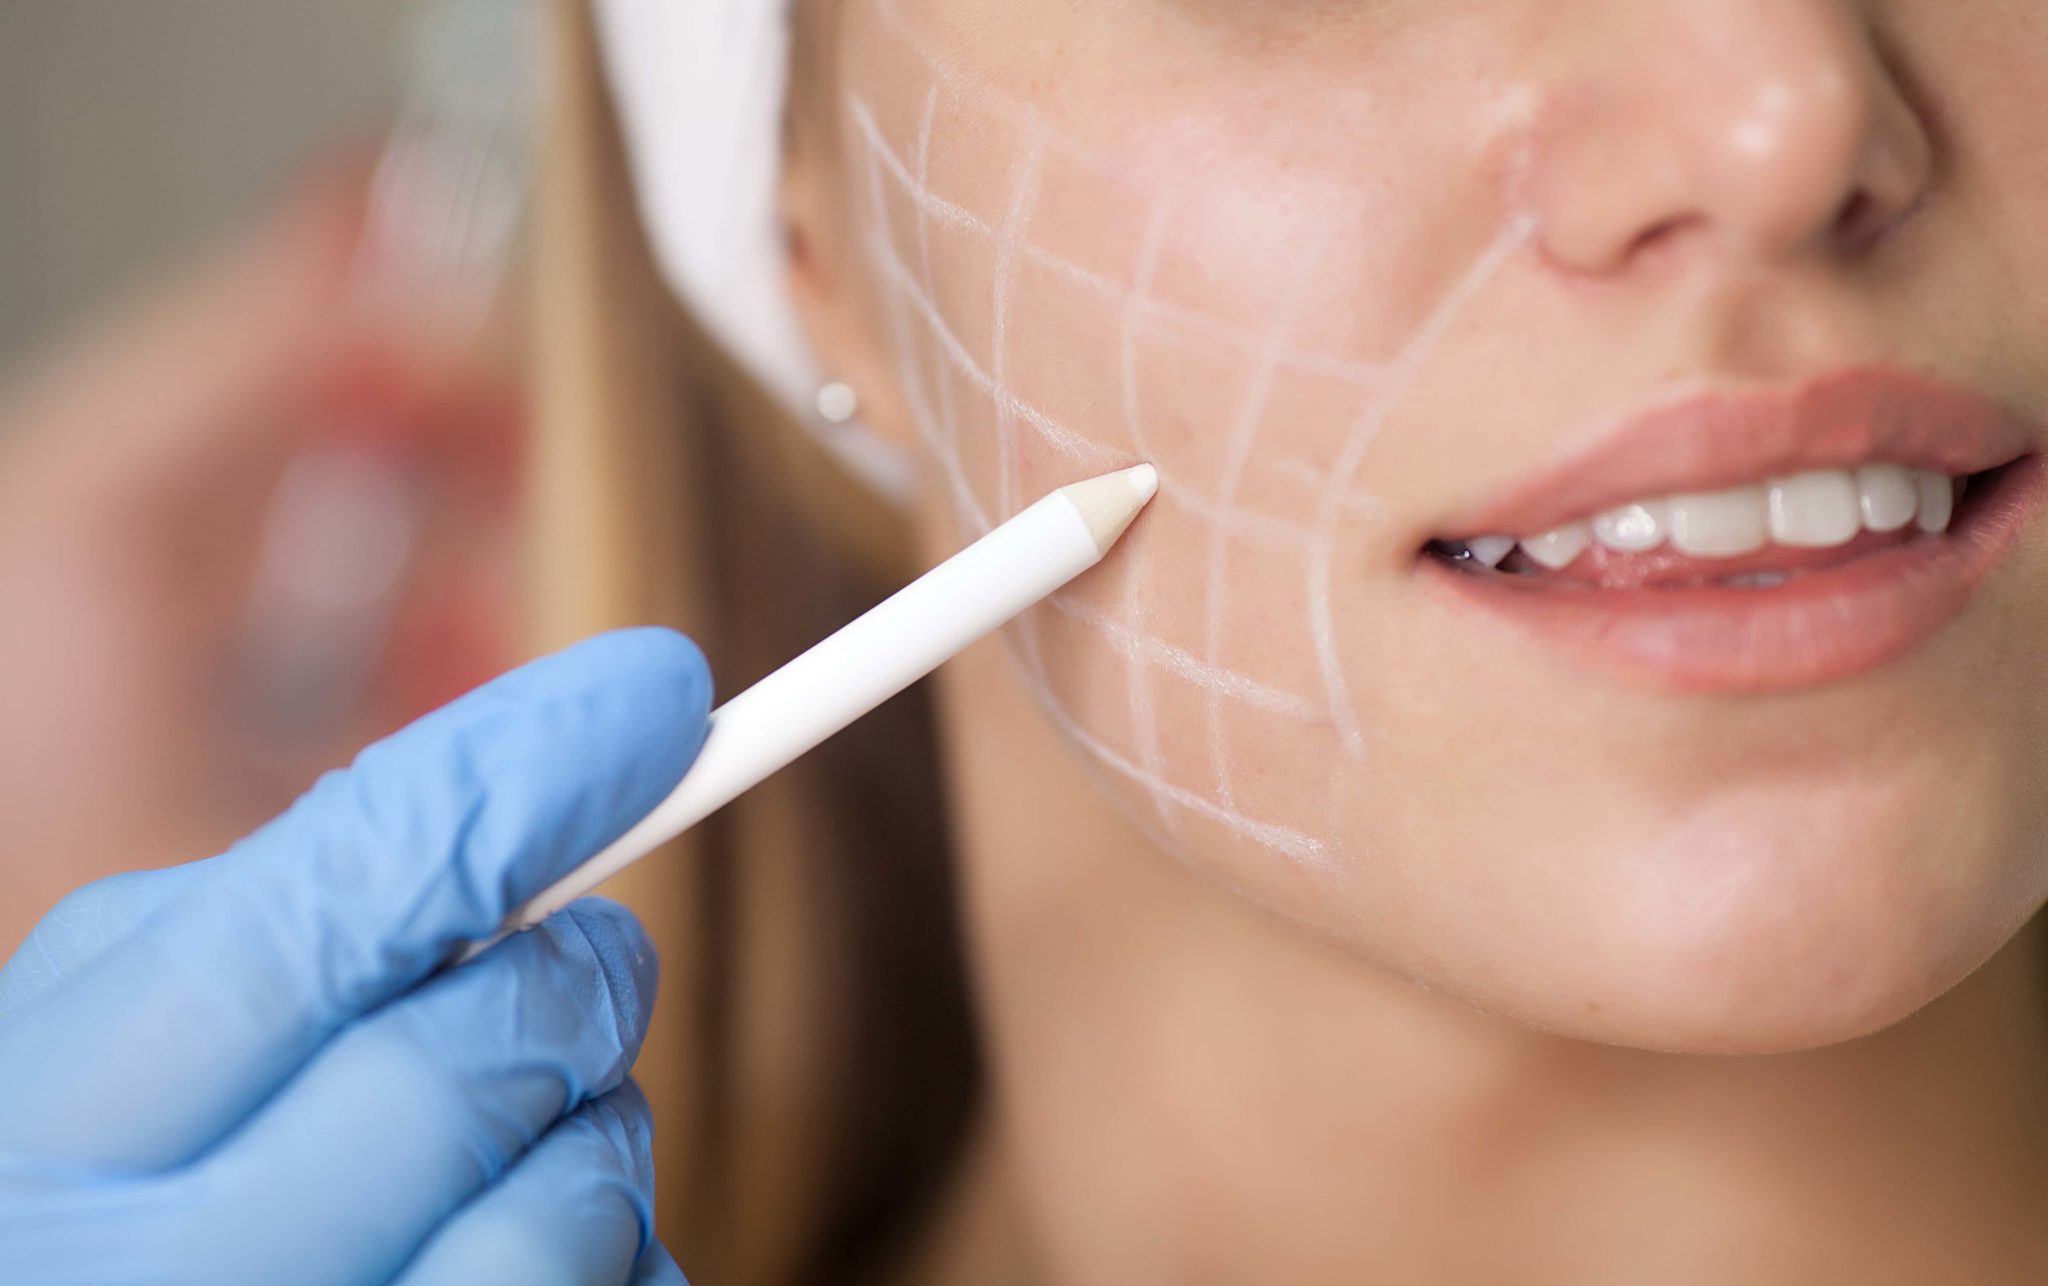 What Does A Carbon Laser Facial Do?